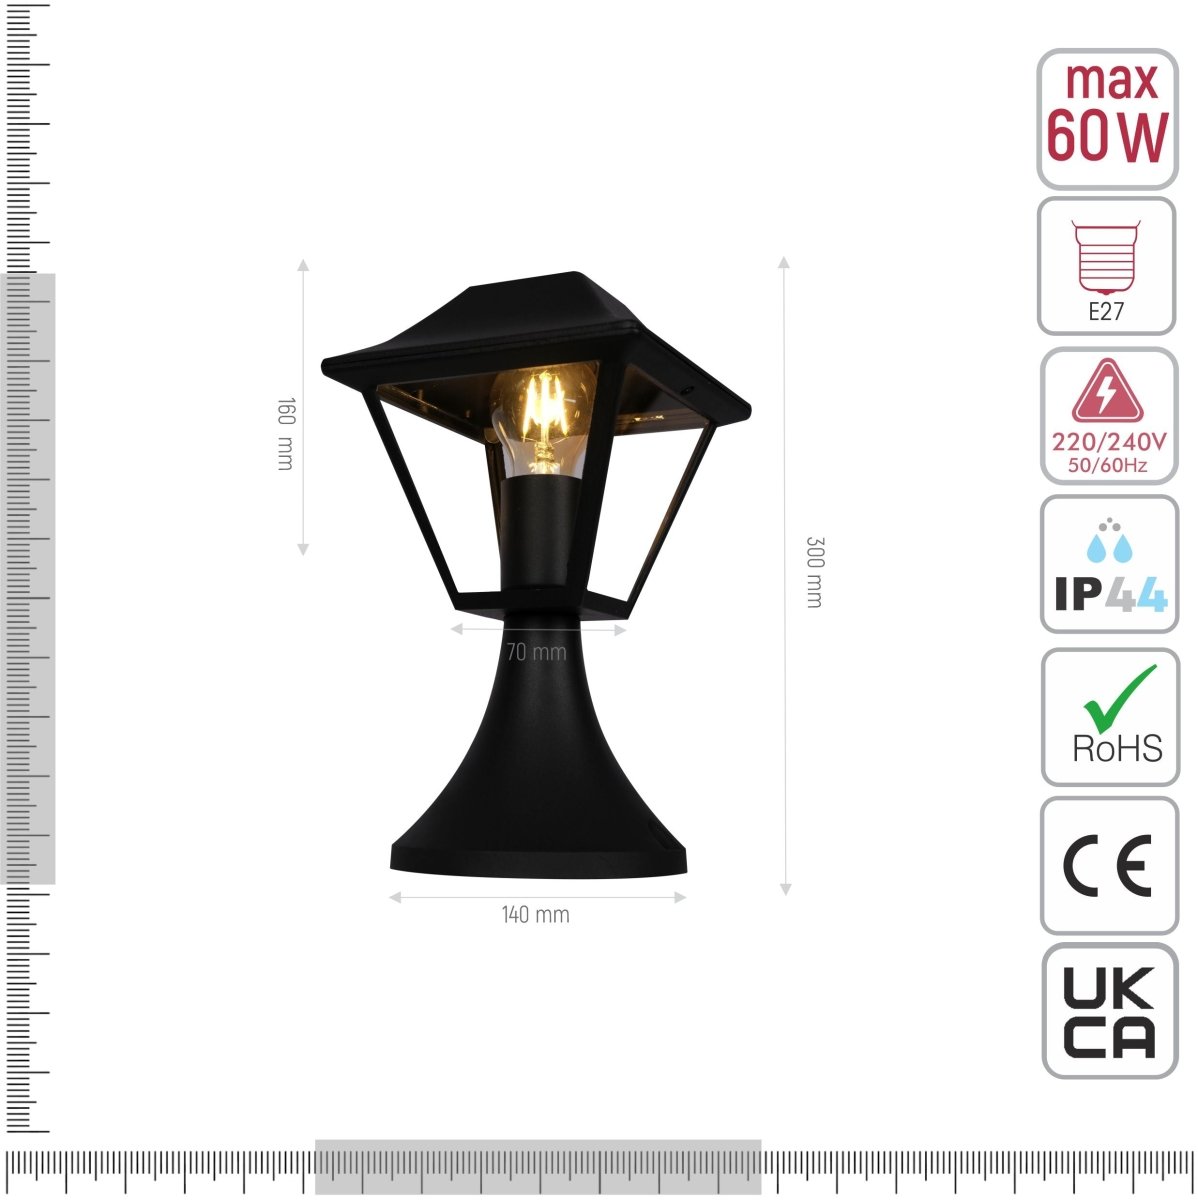 Technical specifications and measurements for Stand Lamp Matt Black Clear Glass E27